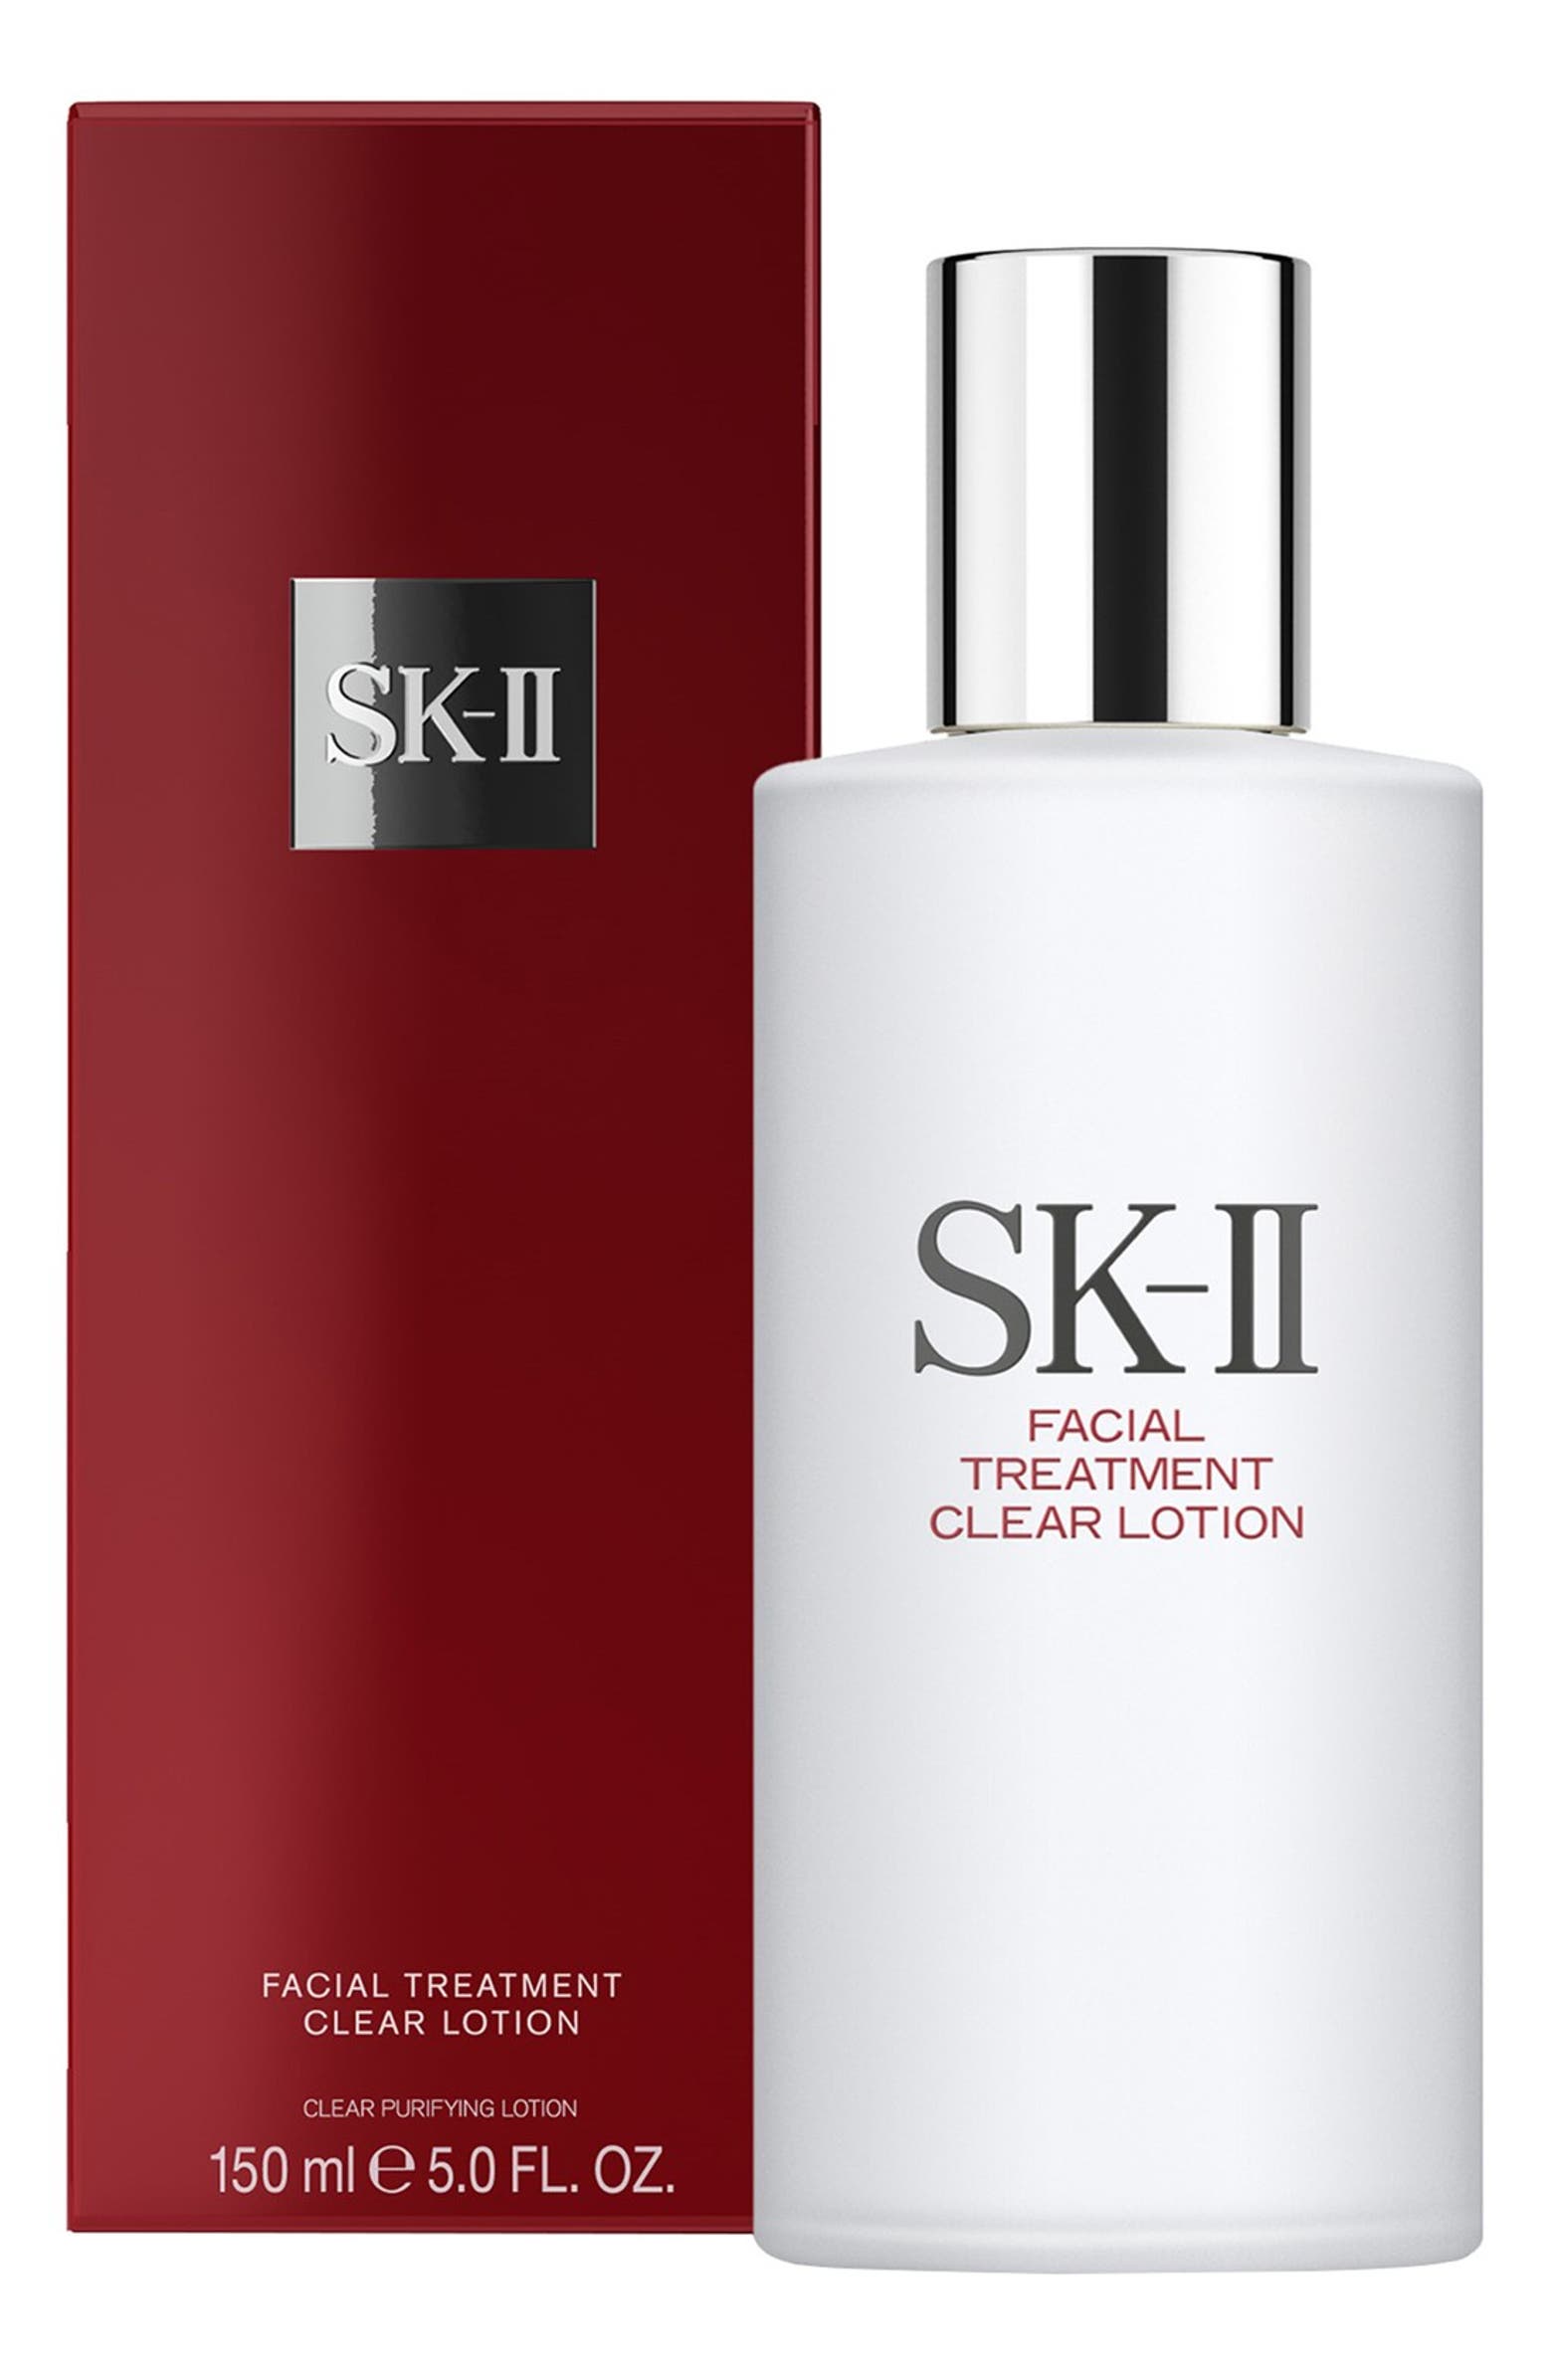 SK-II Facial Treatment Clear Lotion | Nordstrom